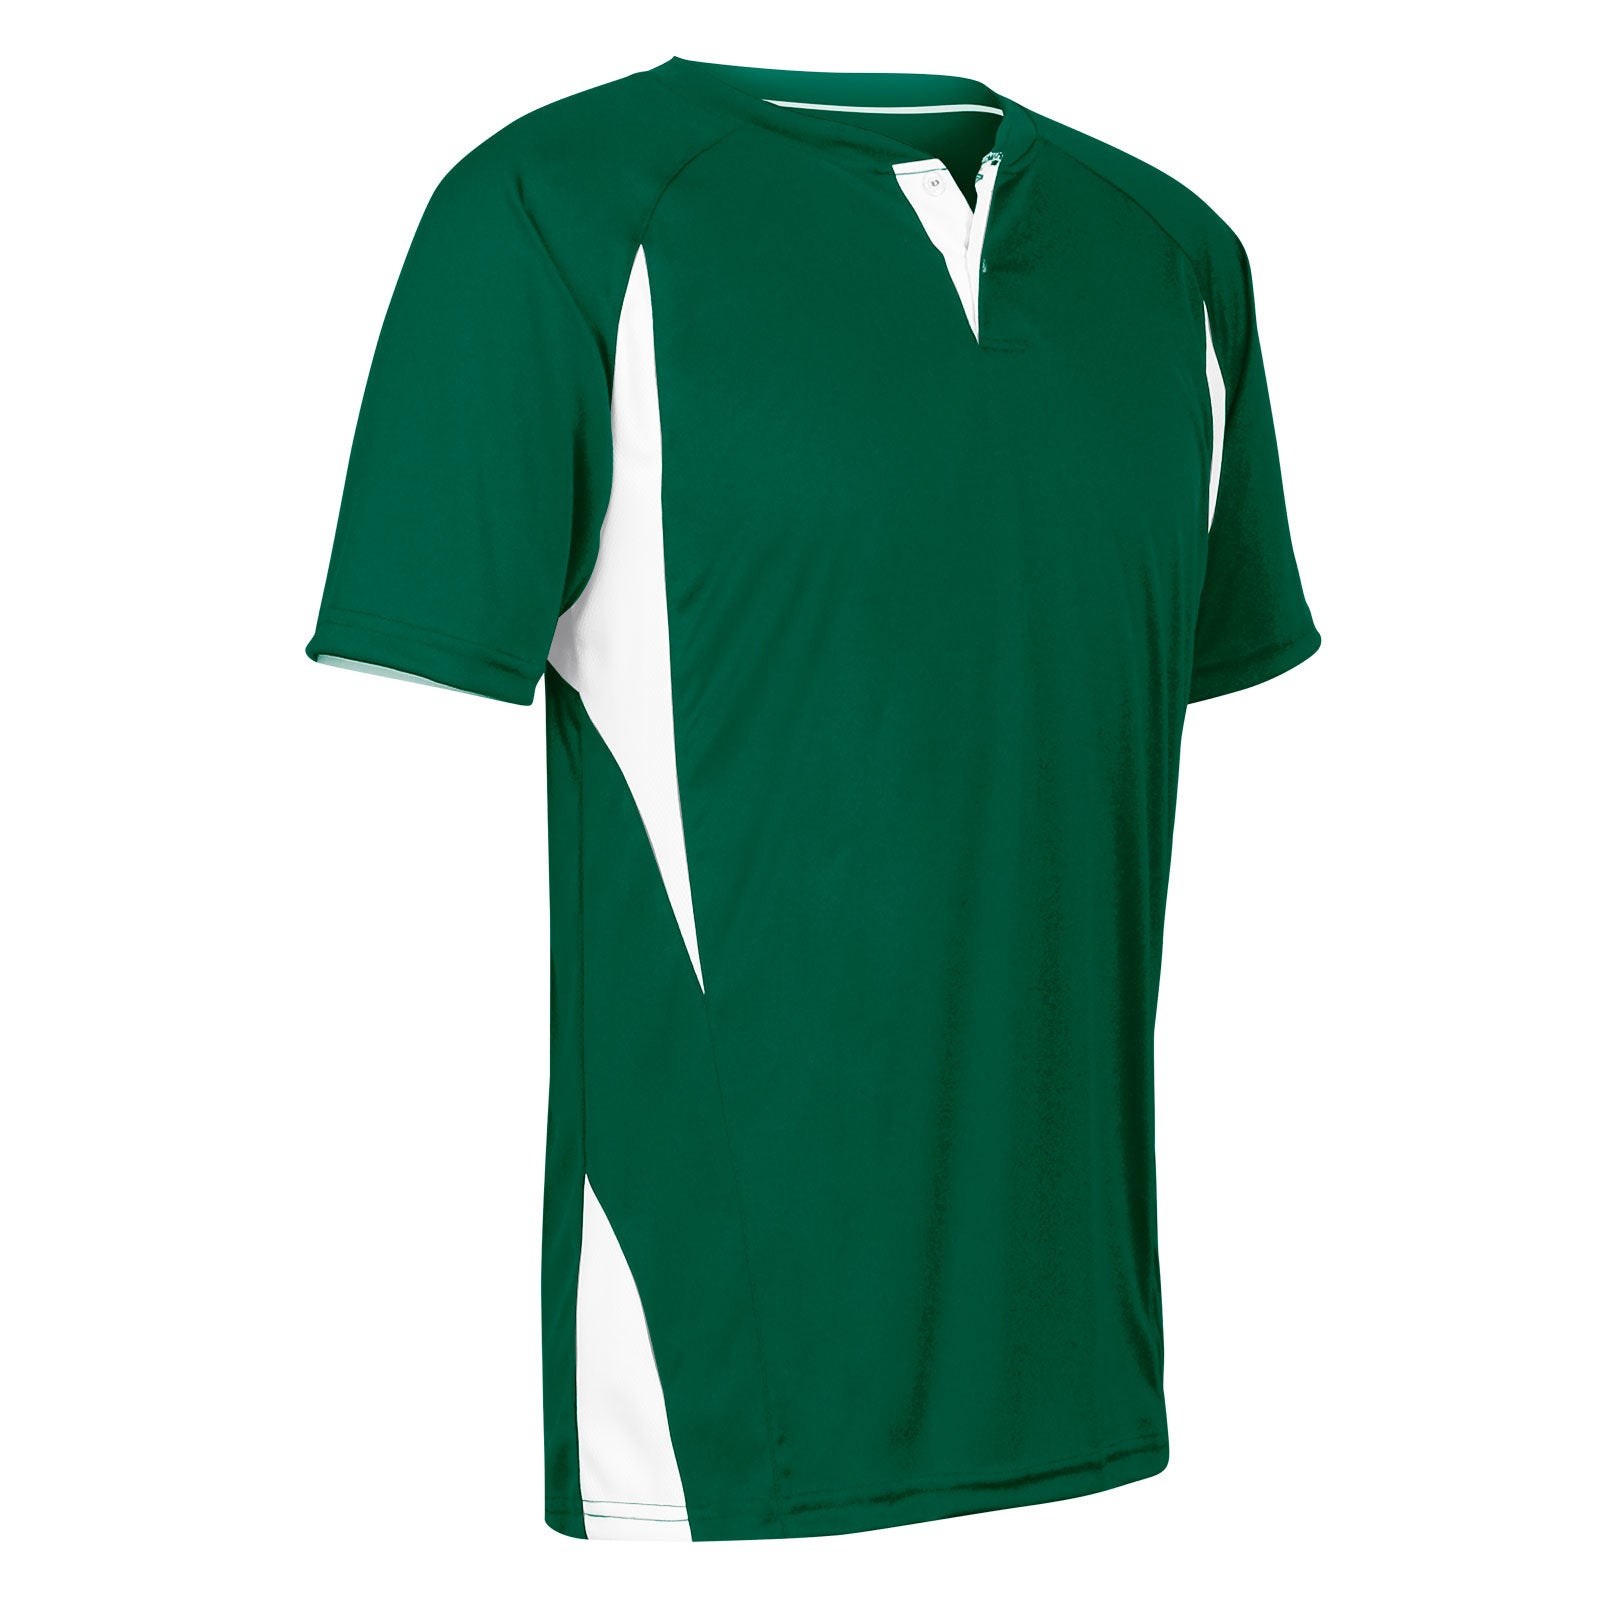 Wild Card 2 Button 2 Color Baseball Jersey FOREST GREEN BODY, WHITE BODY